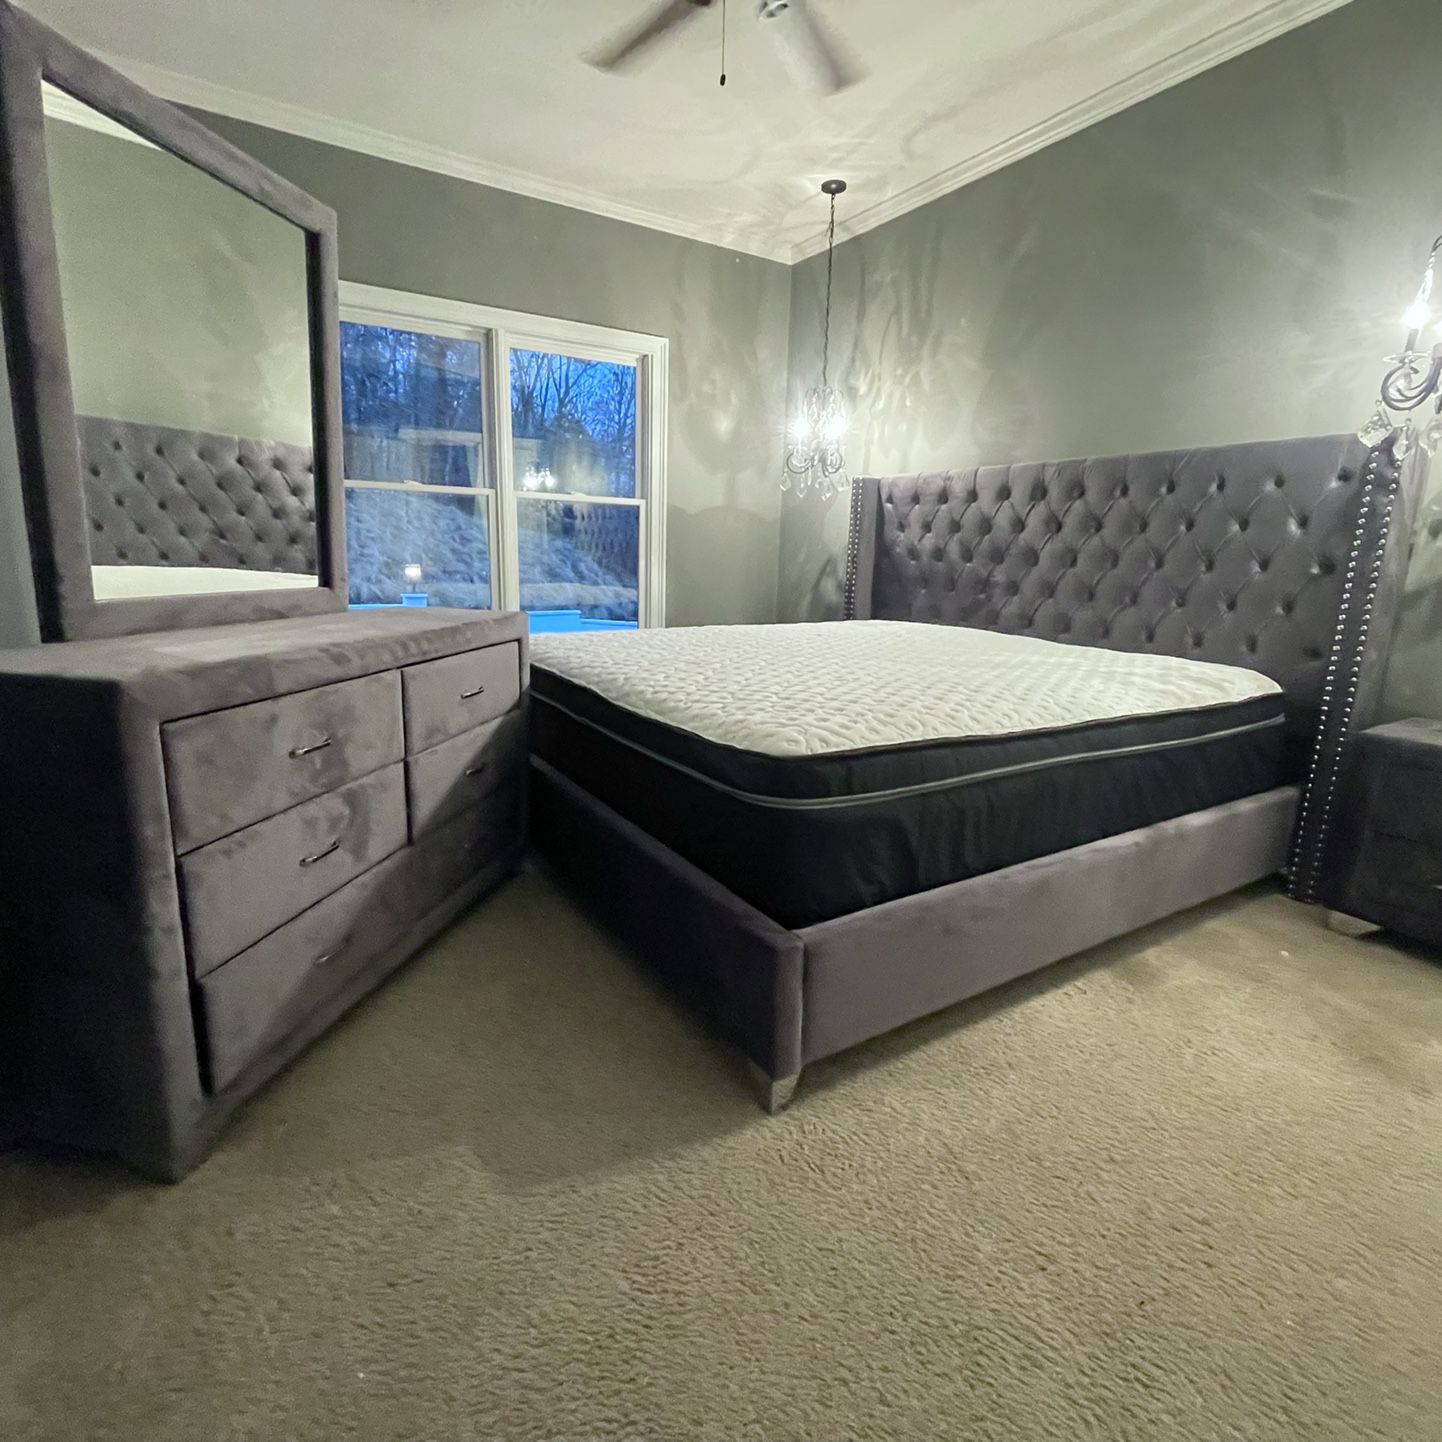 PRICE MATTERS!..KING SIZE BEDROOM SET $975! QUEEN SIZE $895! PRICE INCLUDES DELIVERY!!  Brand new upholstered luxury king bed , dresser, mirror and ni